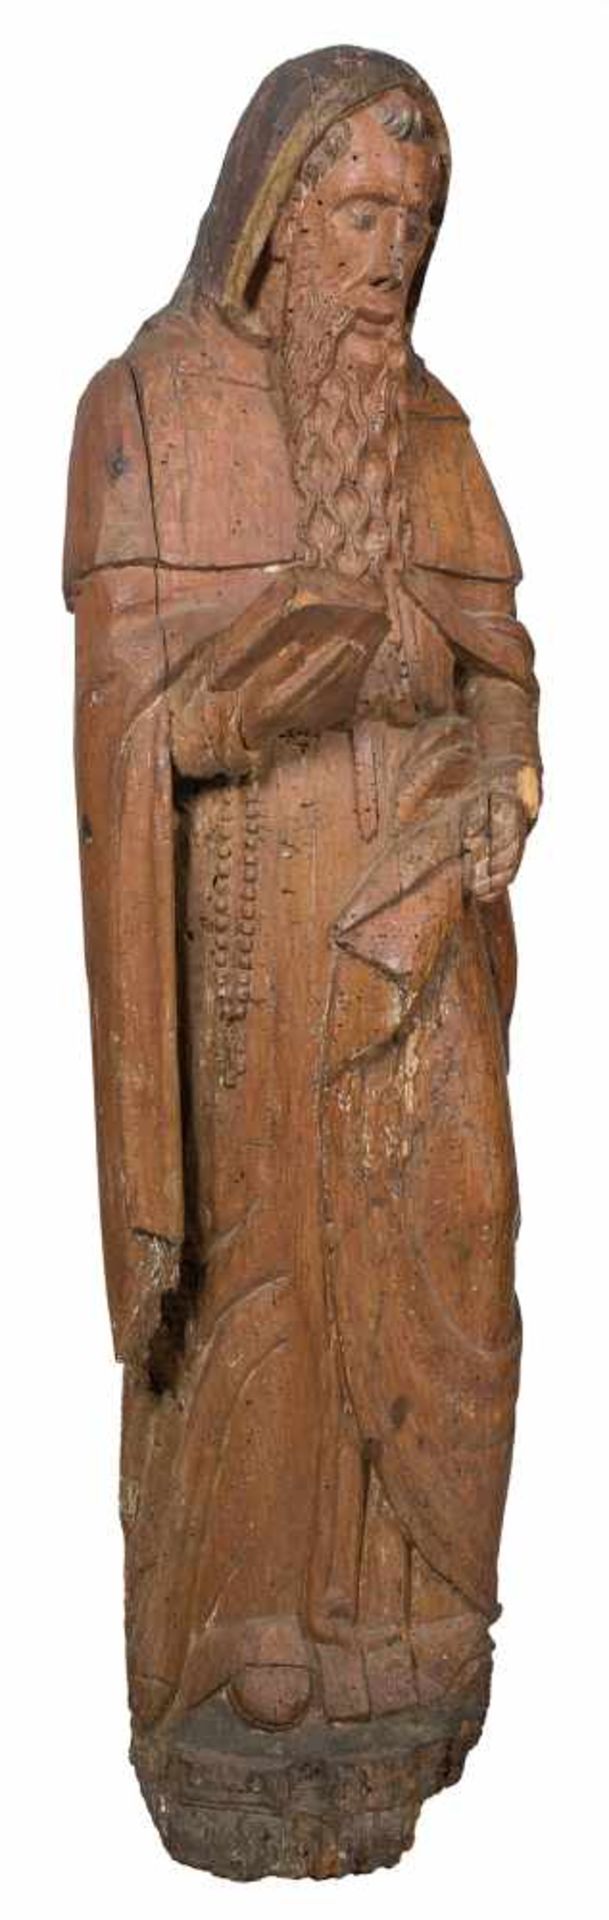 Saint Anthony Carved wooden sculpture. Early 16th century.Saint Anthony Carved wooden sculpture. - Bild 2 aus 5